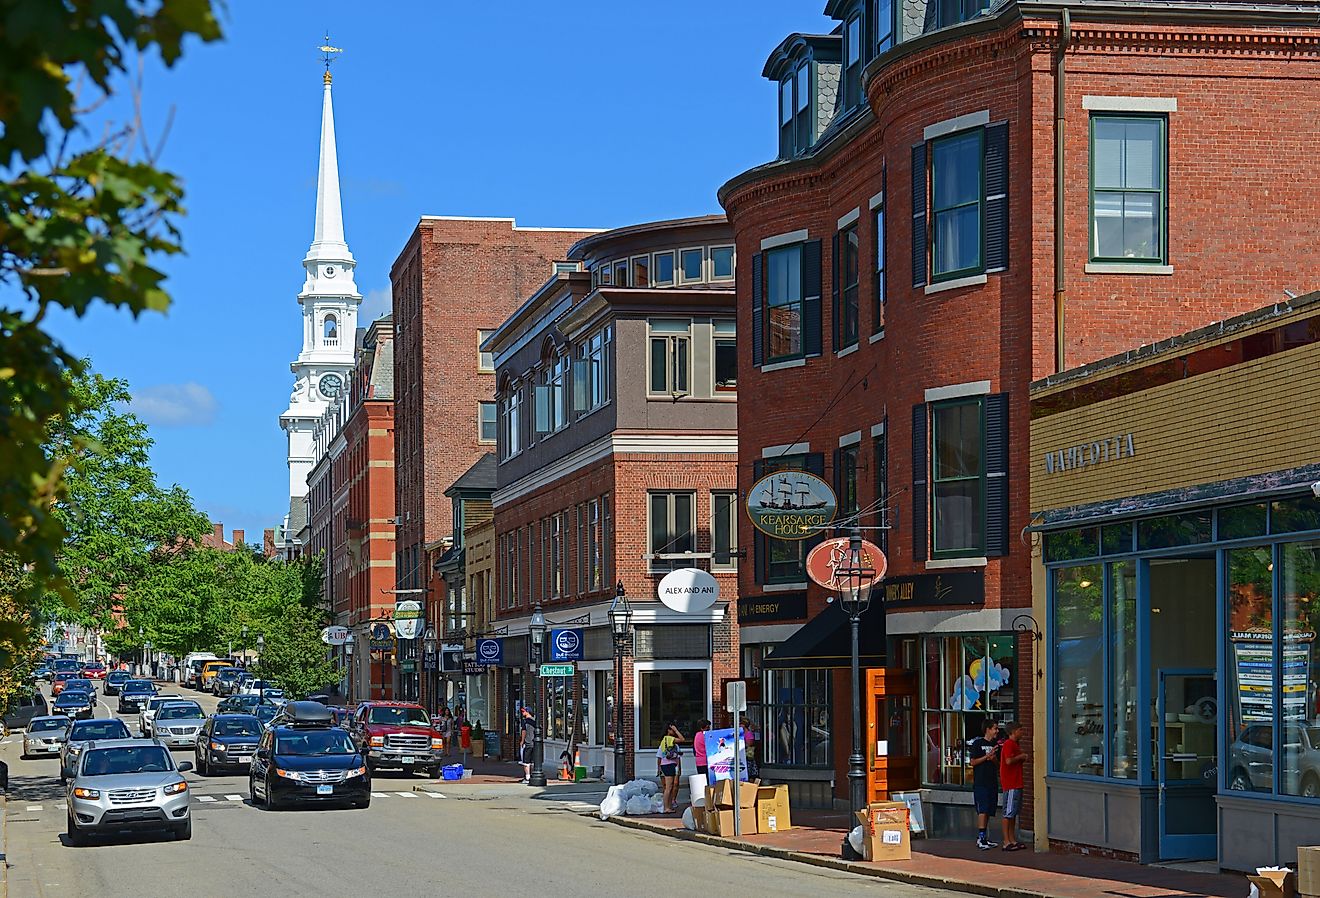 Historic buildings near Market Square in downtown Portsmouth. Image credit Wangkun Jia via Shutterstock.